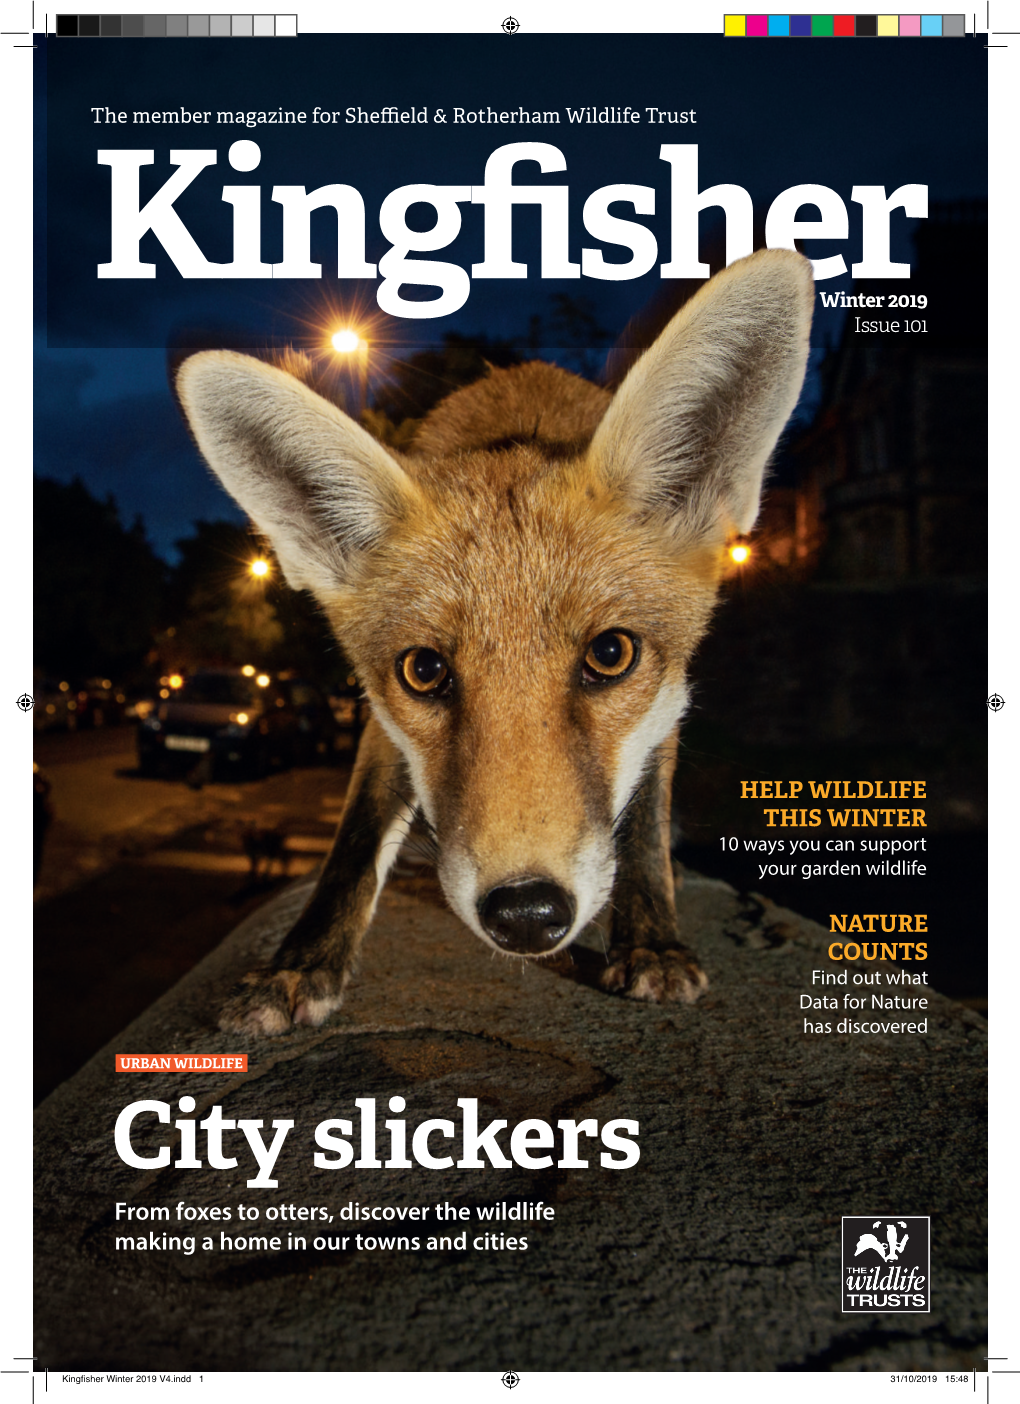 City Slickers from Foxes to Otters, Discover the Wildlife Making a Home in Our Towns and Cities